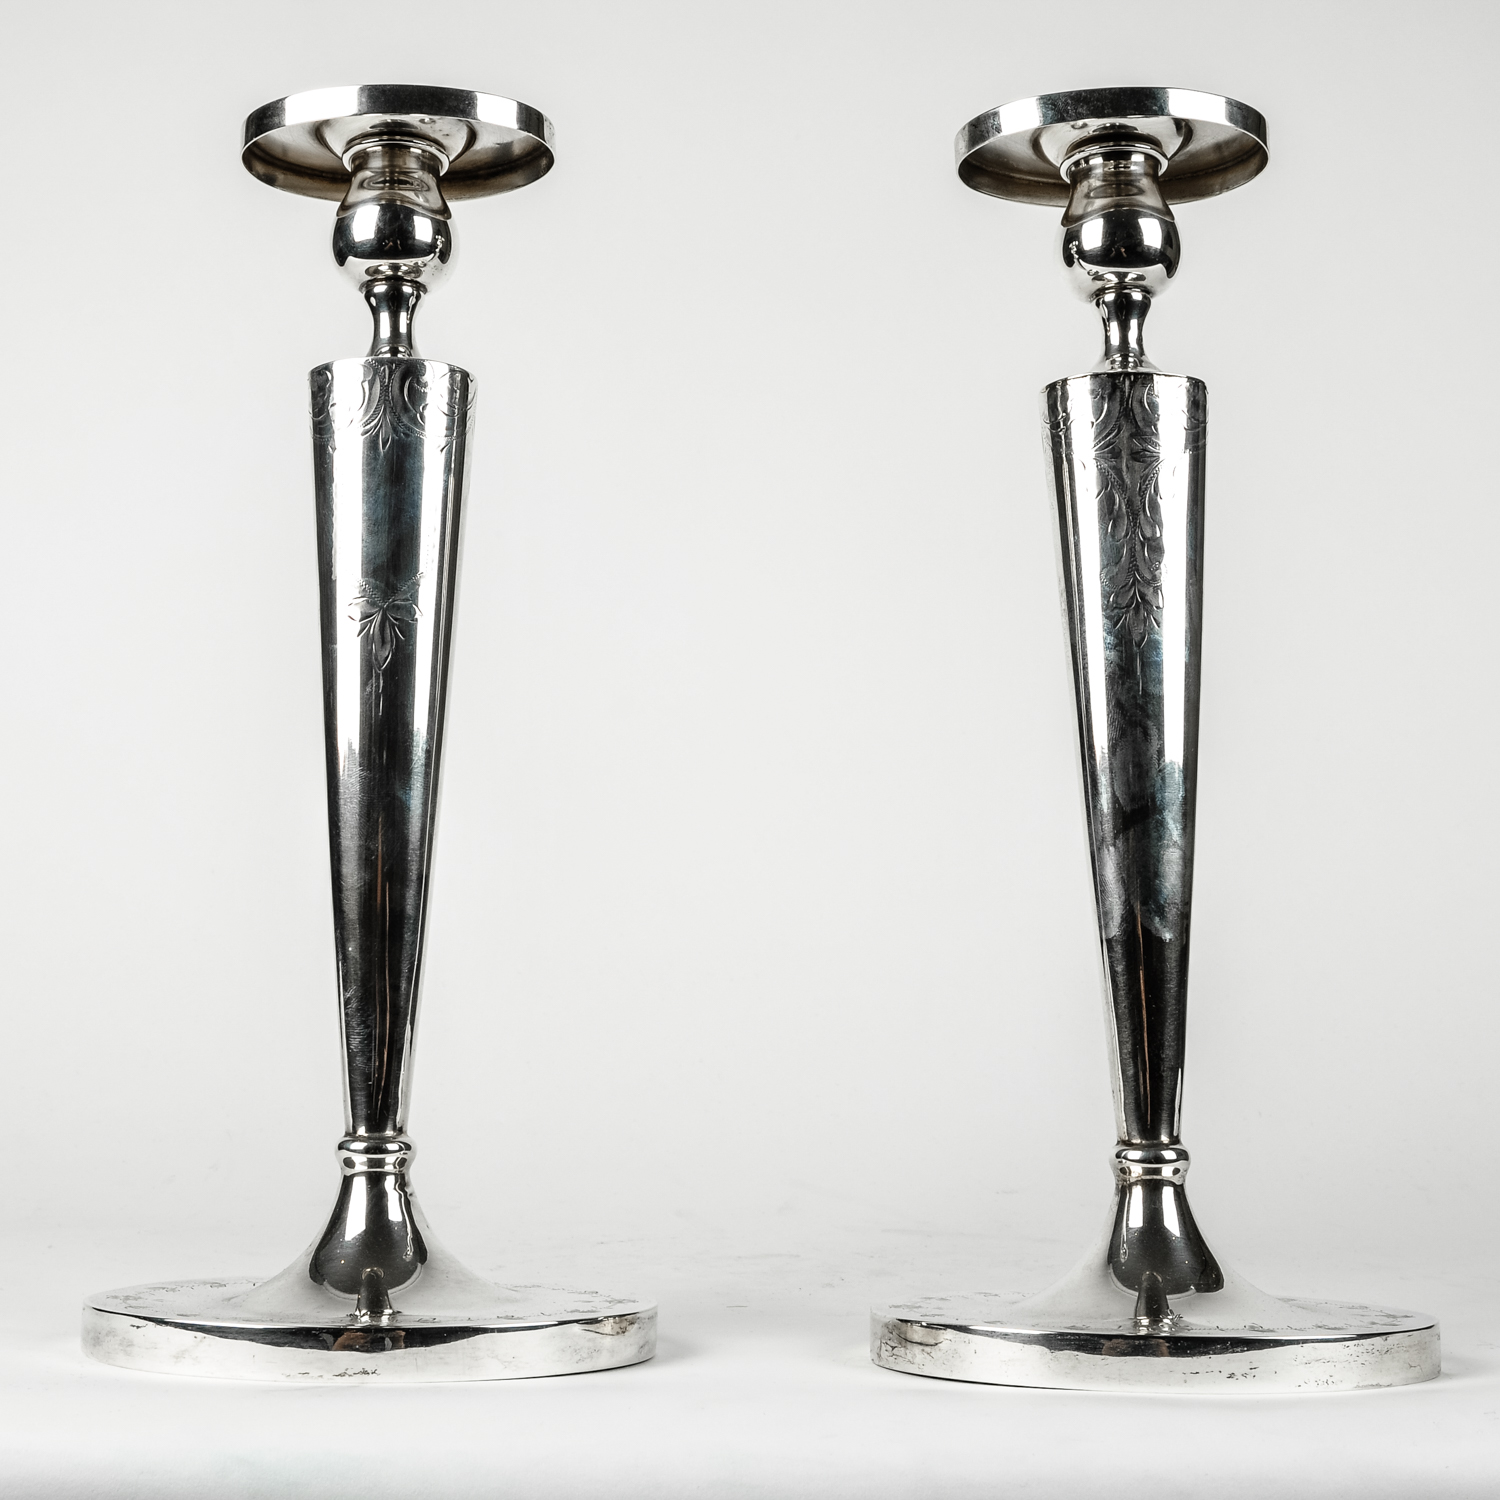 Scented Candle and Sterling Silver Candlestick Set